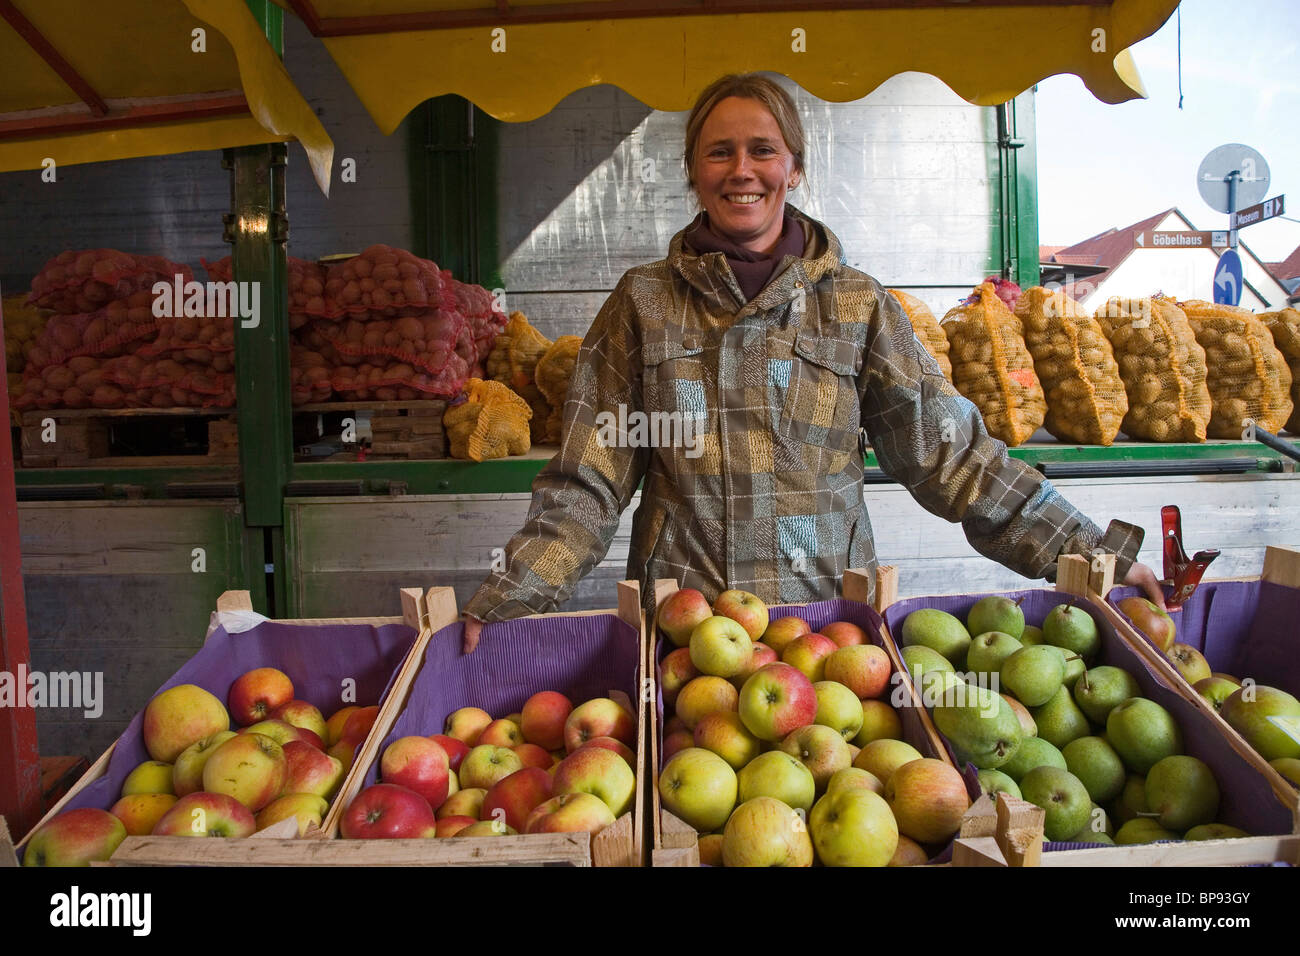 woman selling fruit and vegetables, market, Springe, Hanover region, Lower Saxony, northern Germany Stock Photo